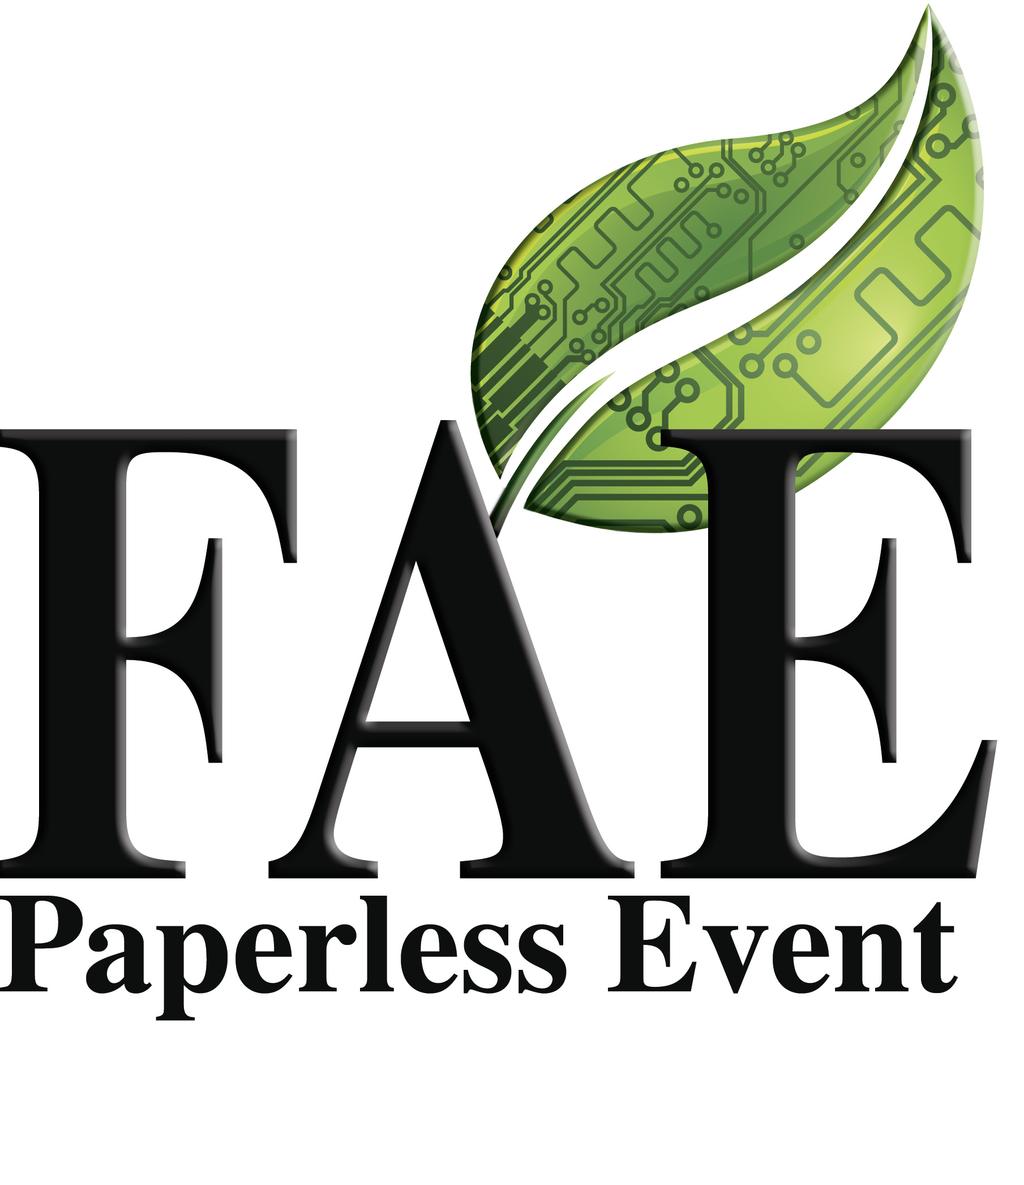 FAEVP Save on this and other 2013 FAE events with the all NEW FAE Value Pass Program (formerly known as Pay-One-Price or POP) With the new FAE Value Pass (FAE VP) Program, you can fulfill your